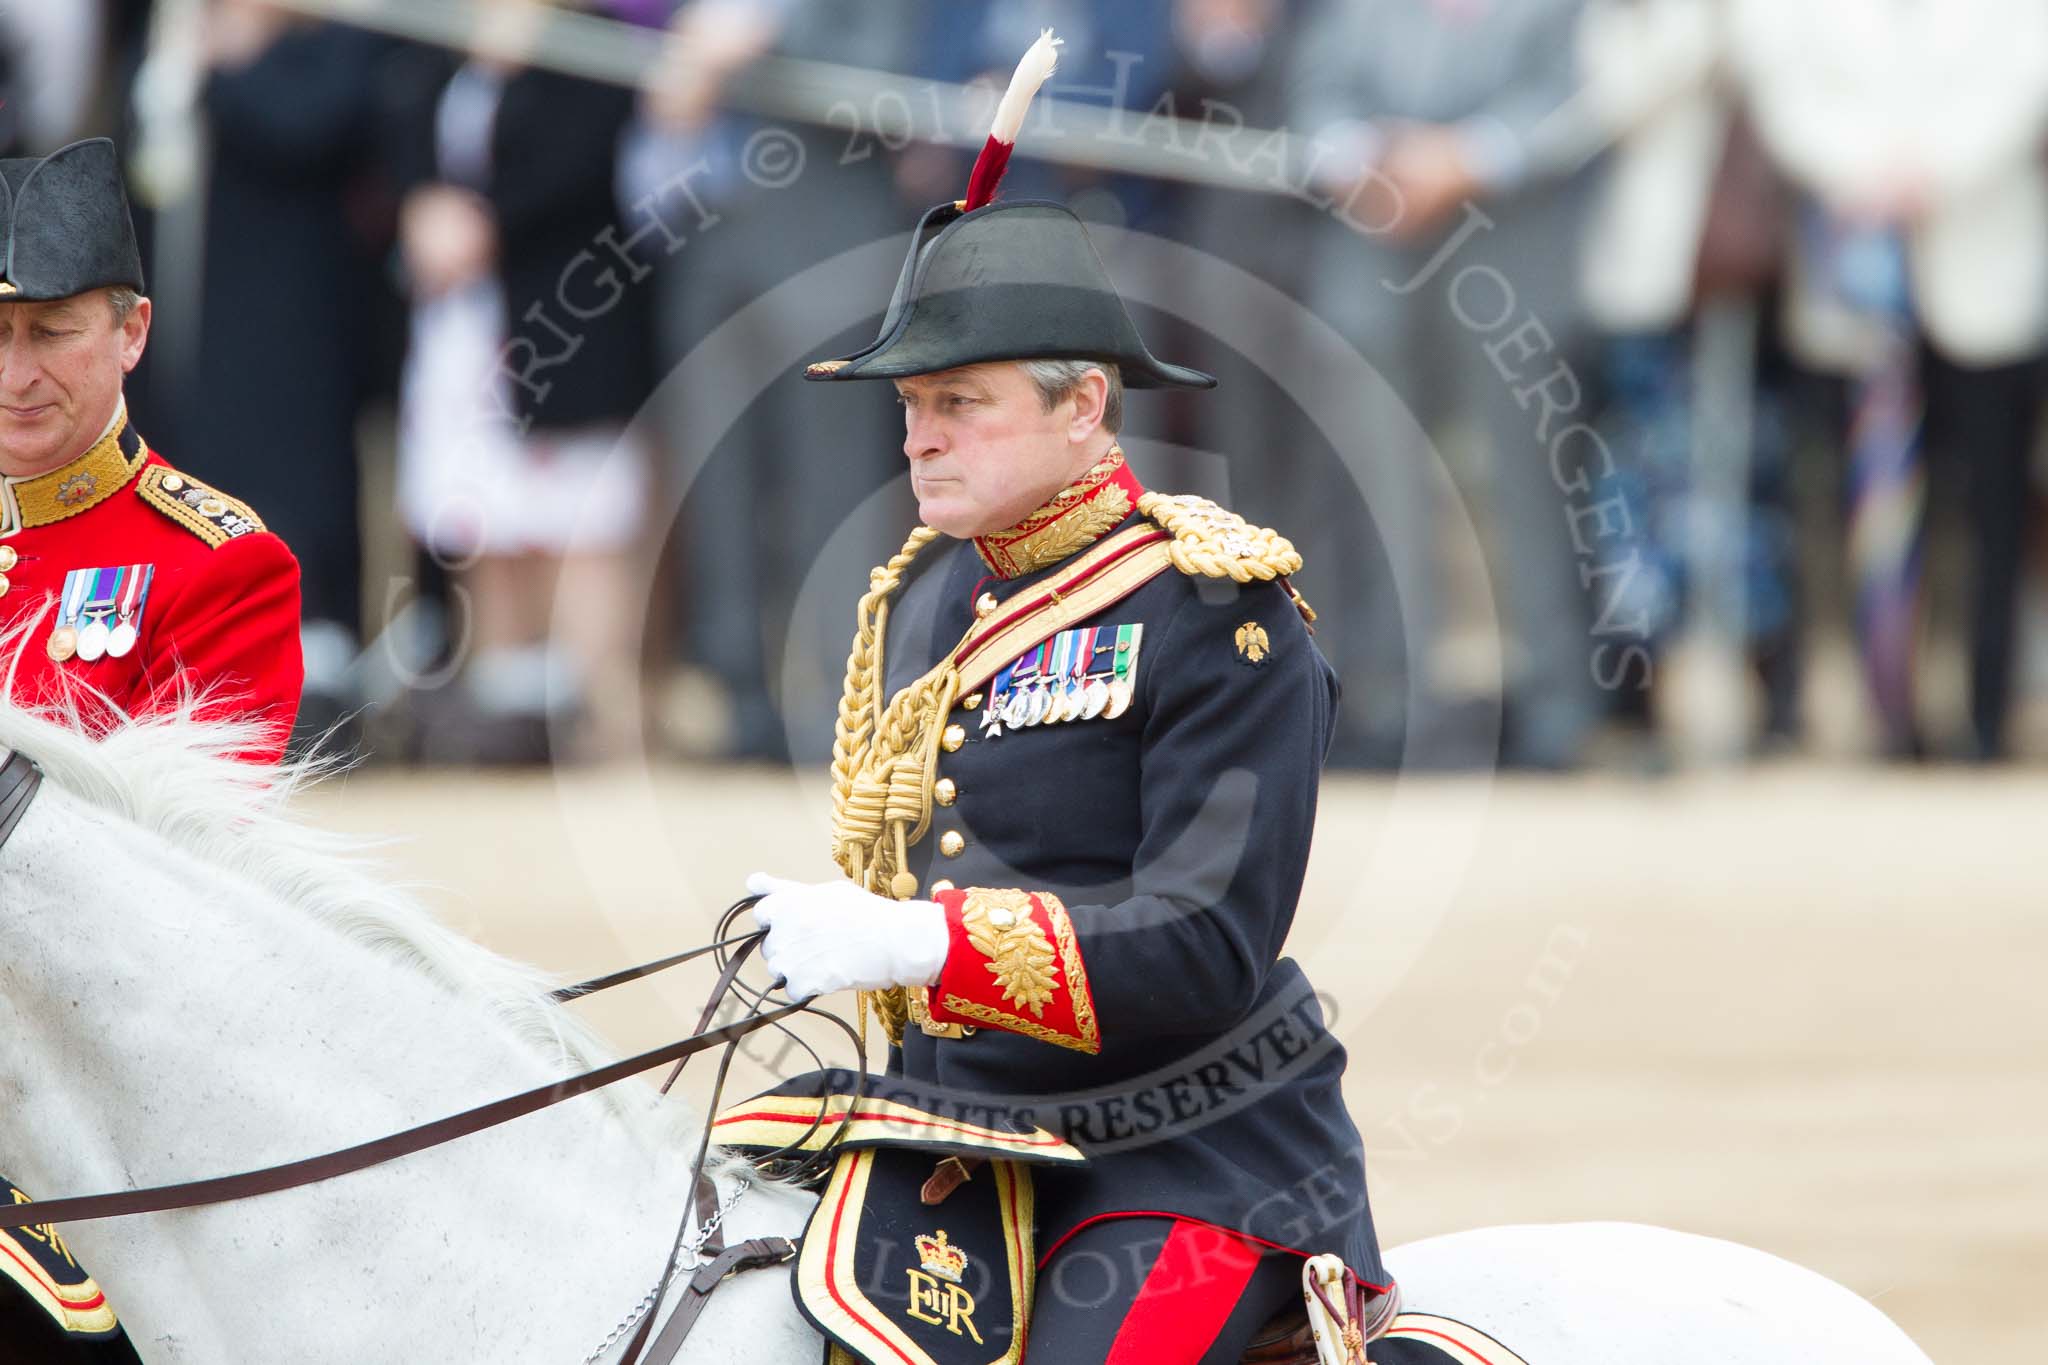 Trooping the Colour 2012: Colonel W T Browne, Crown Equerry, during the Inspection of the Line..
Horse Guards Parade, Westminster,
London SW1,

United Kingdom,
on 16 June 2012 at 11:02, image #193